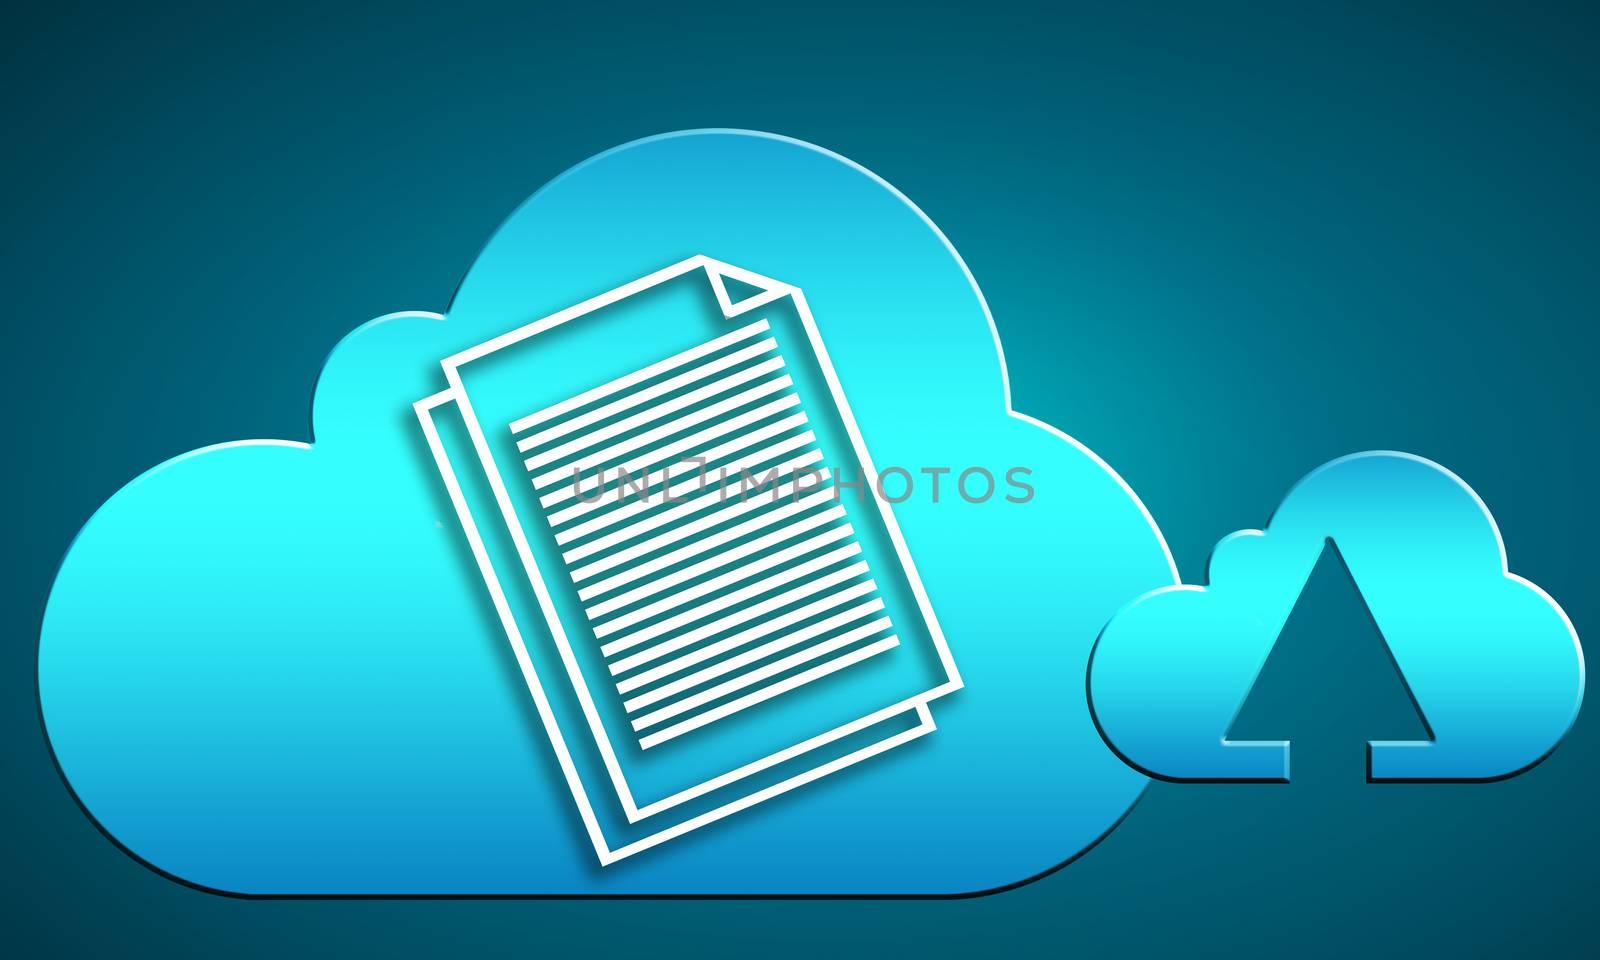 Cloub computing with blue cloud icon and white line text documen by tang90246